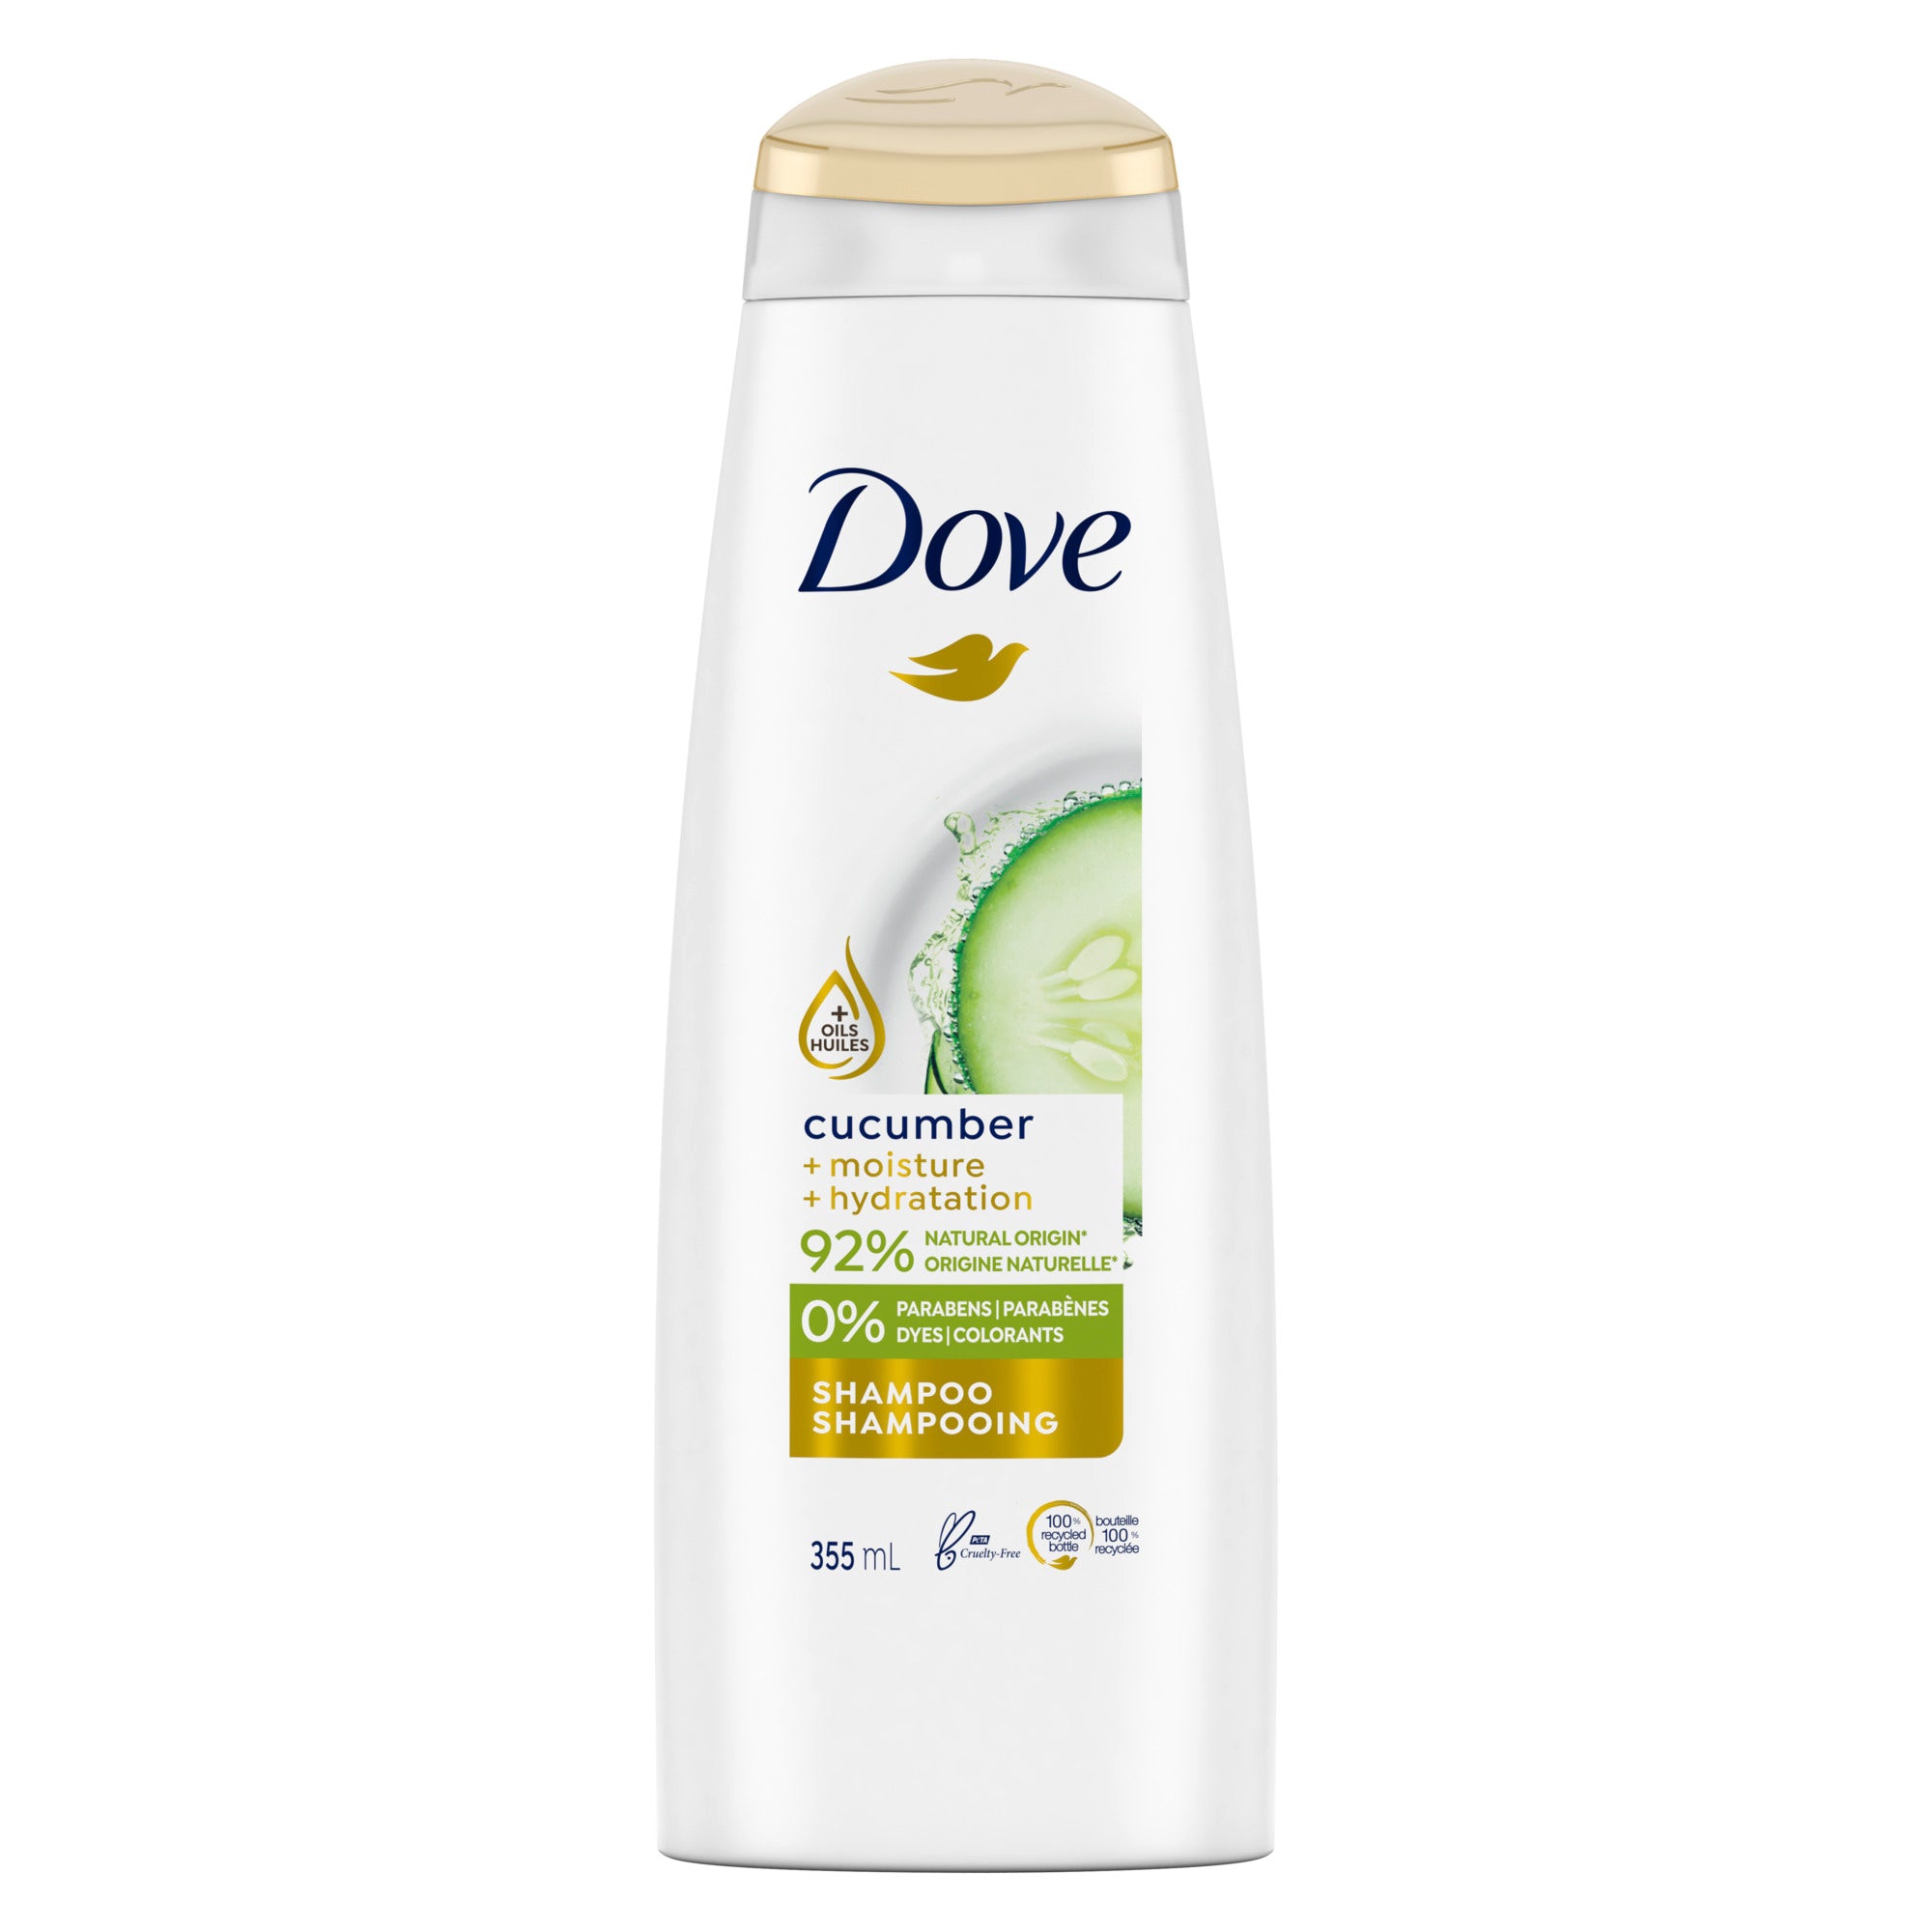 Showing the front angle view of the Dove Shampoo Cool Moisture 355ml product.